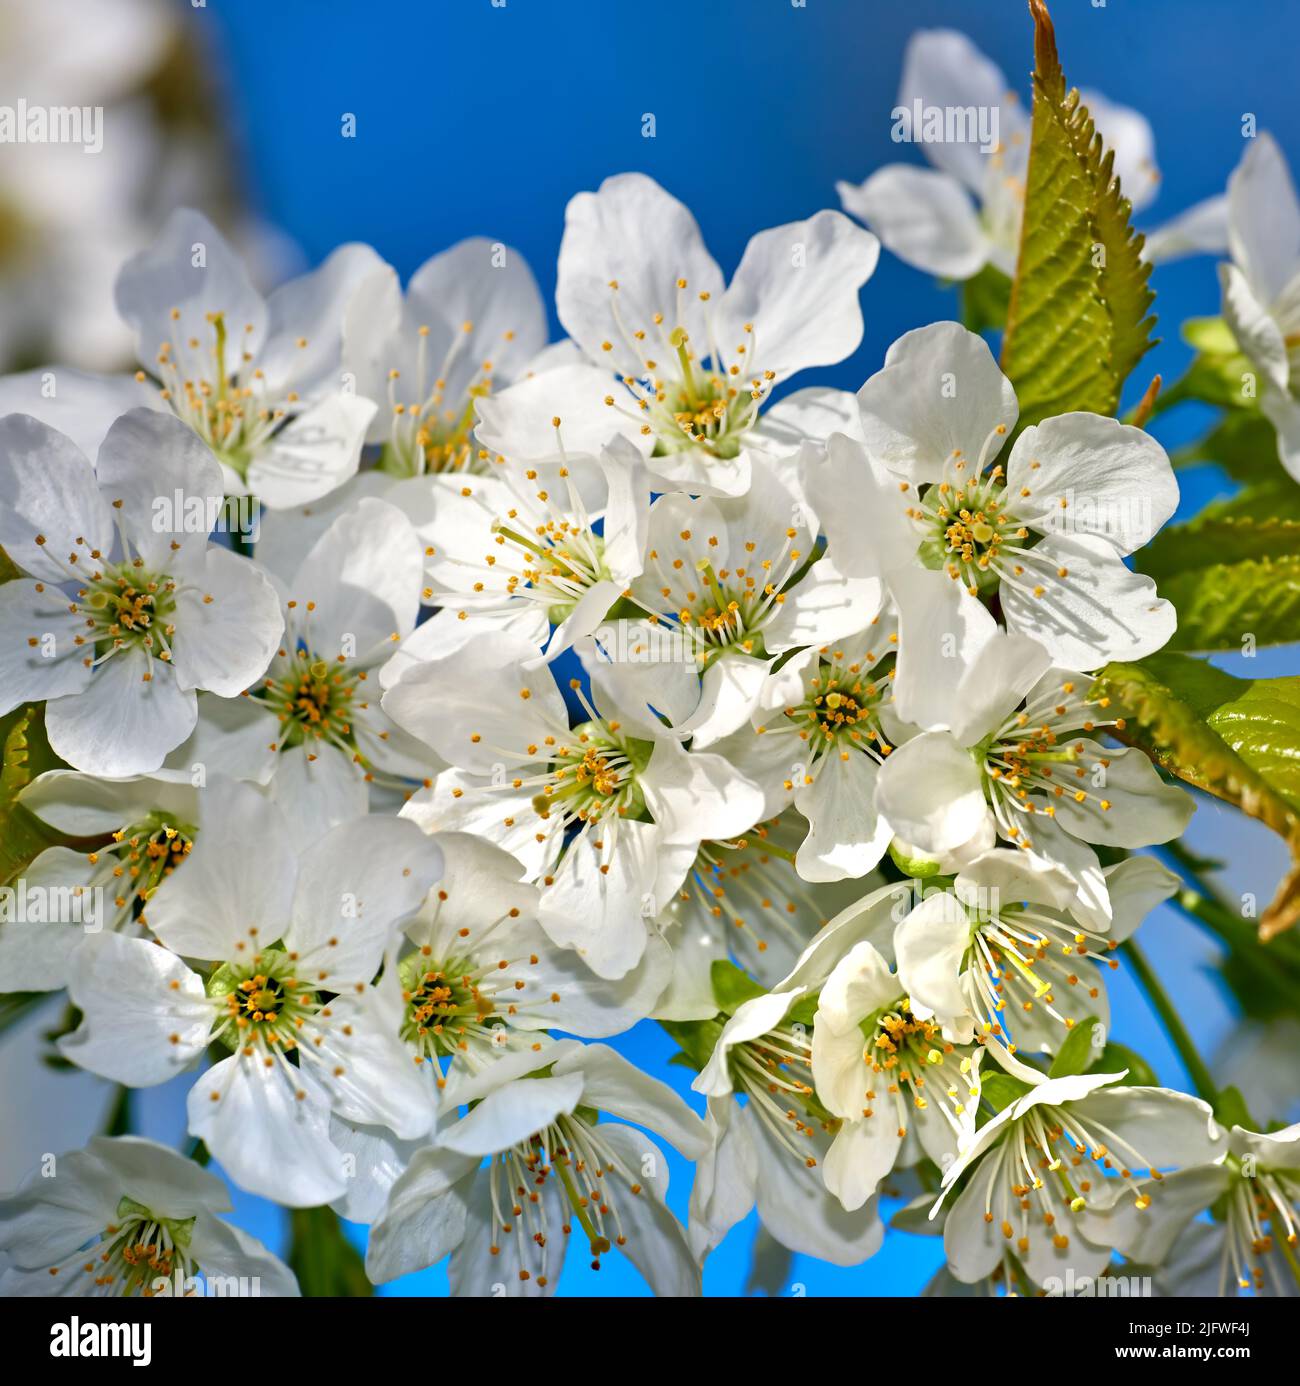 Blooming Mirabelle plum or Prunus Domestica flower in a garden in springtime. Flowering fruit tree with white flowerheads with a blue sky background Stock Photo